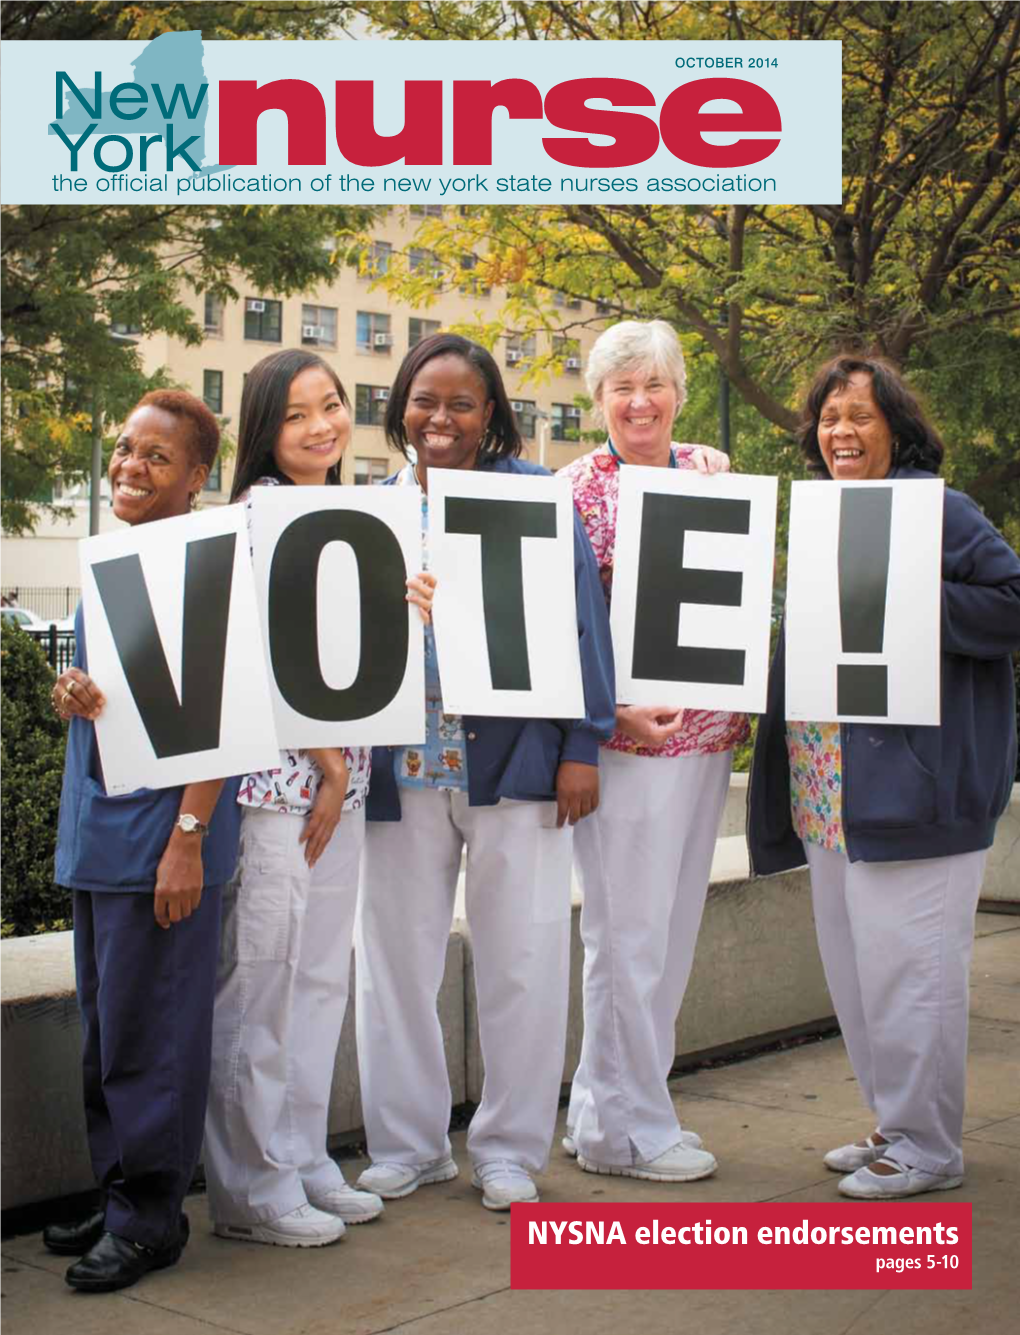 NYSNA Election Endorsements Pages 5-10 2 New York Nurse October 2014 Sacred Rights Worth Defending